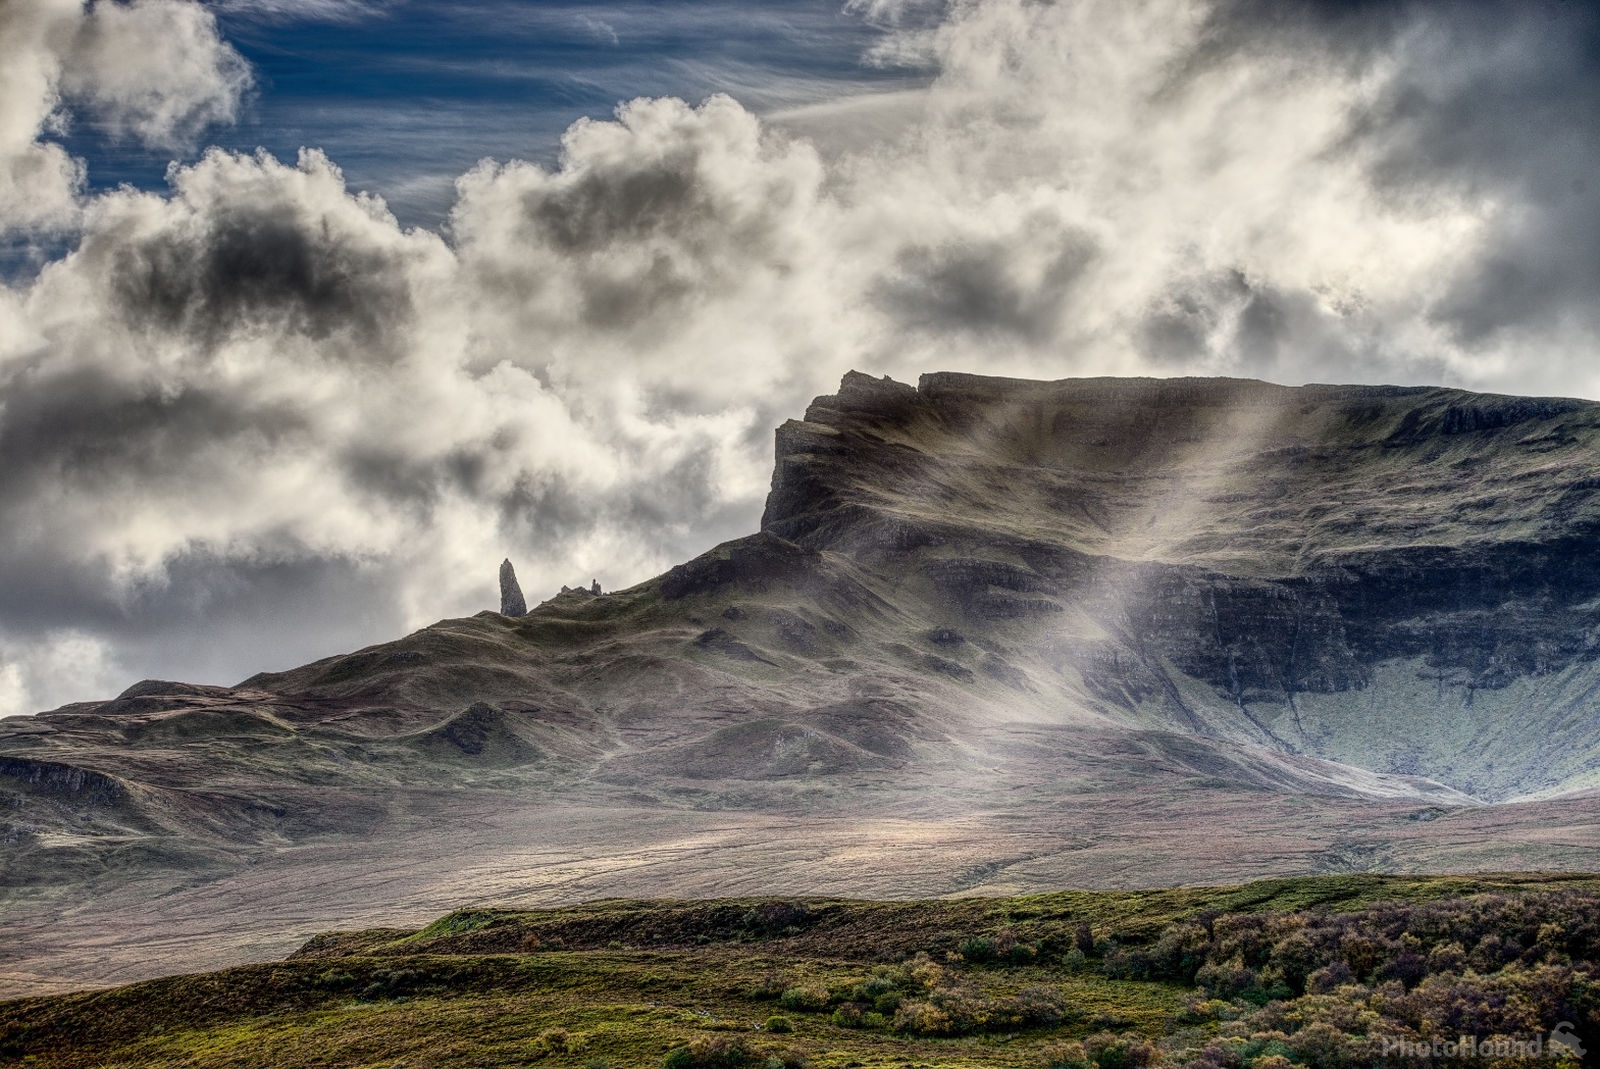 Image of The Old Man of Storr by Peter Zalabai